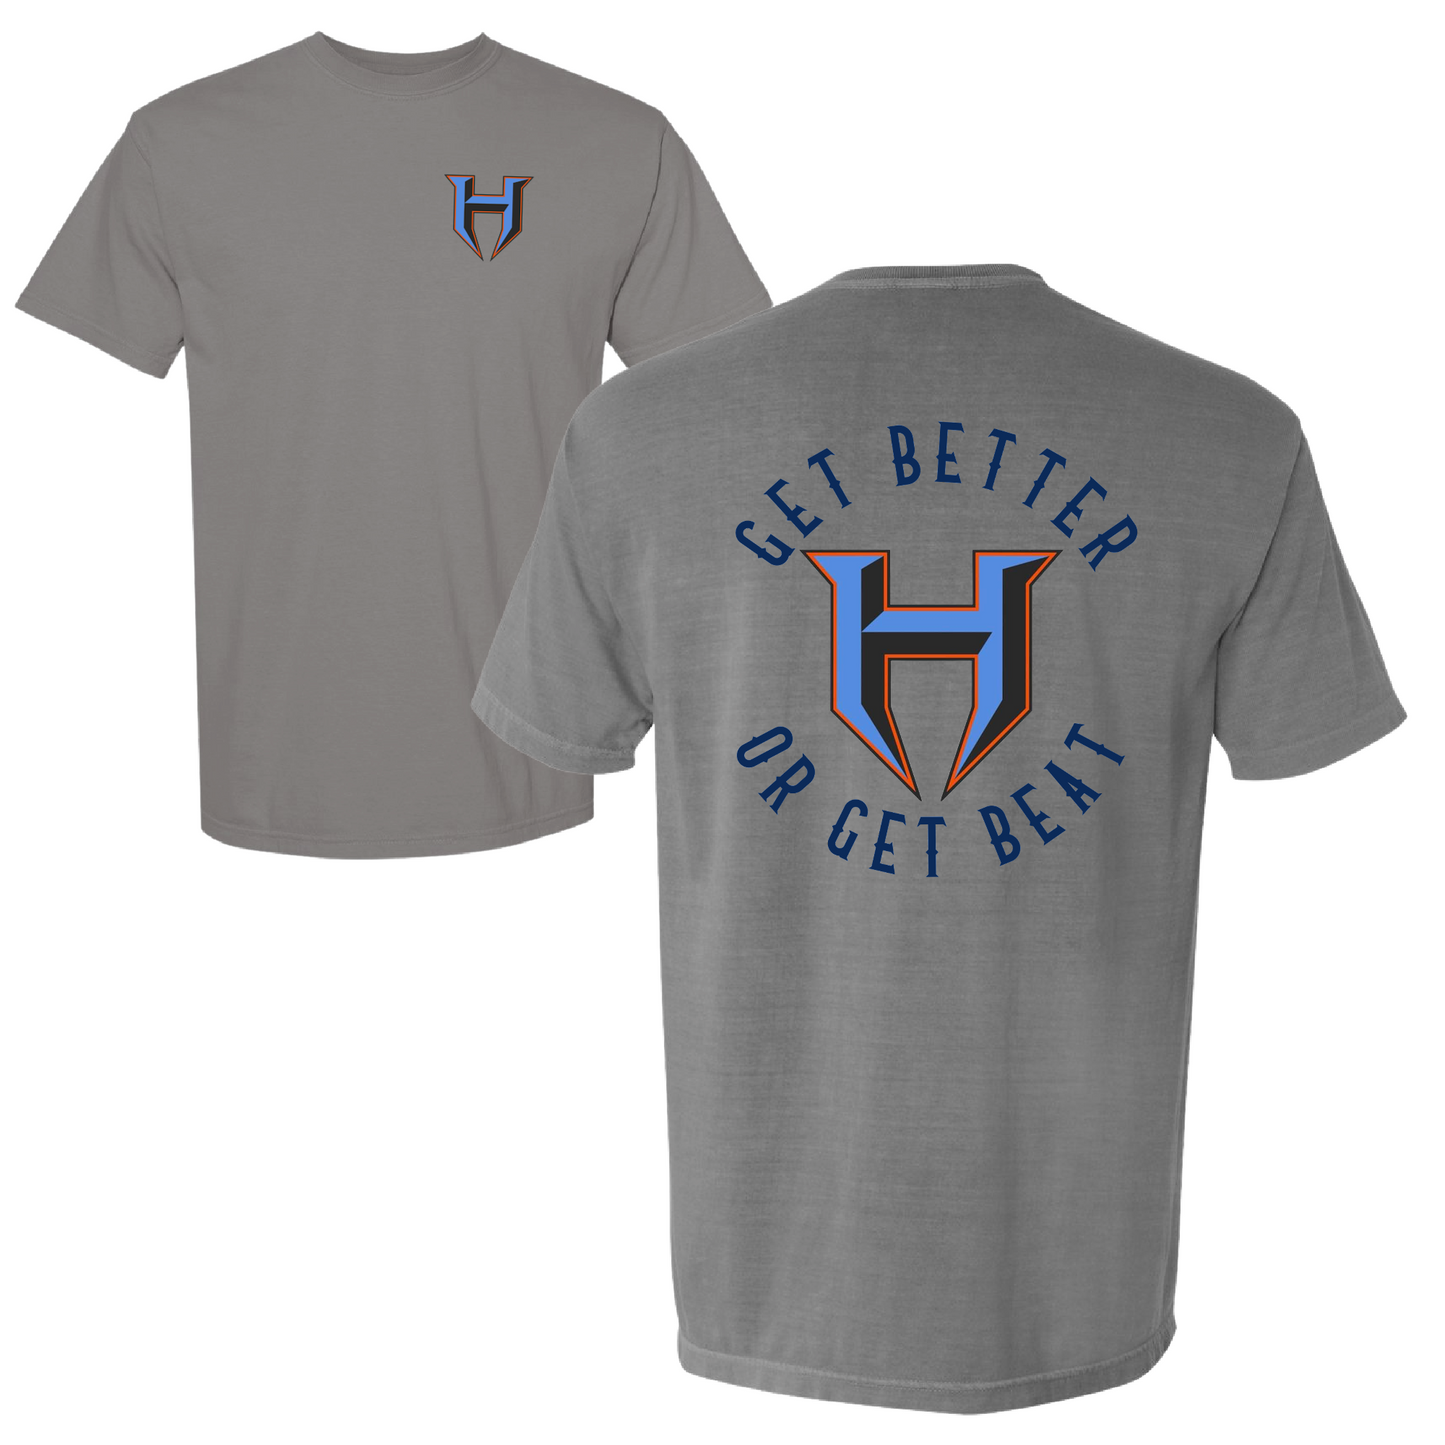 Comfort Colors Pocket Tee Get Better or Get Beat Hornets Baseball Tee/ YOUTH SIZES FAUX POCKET